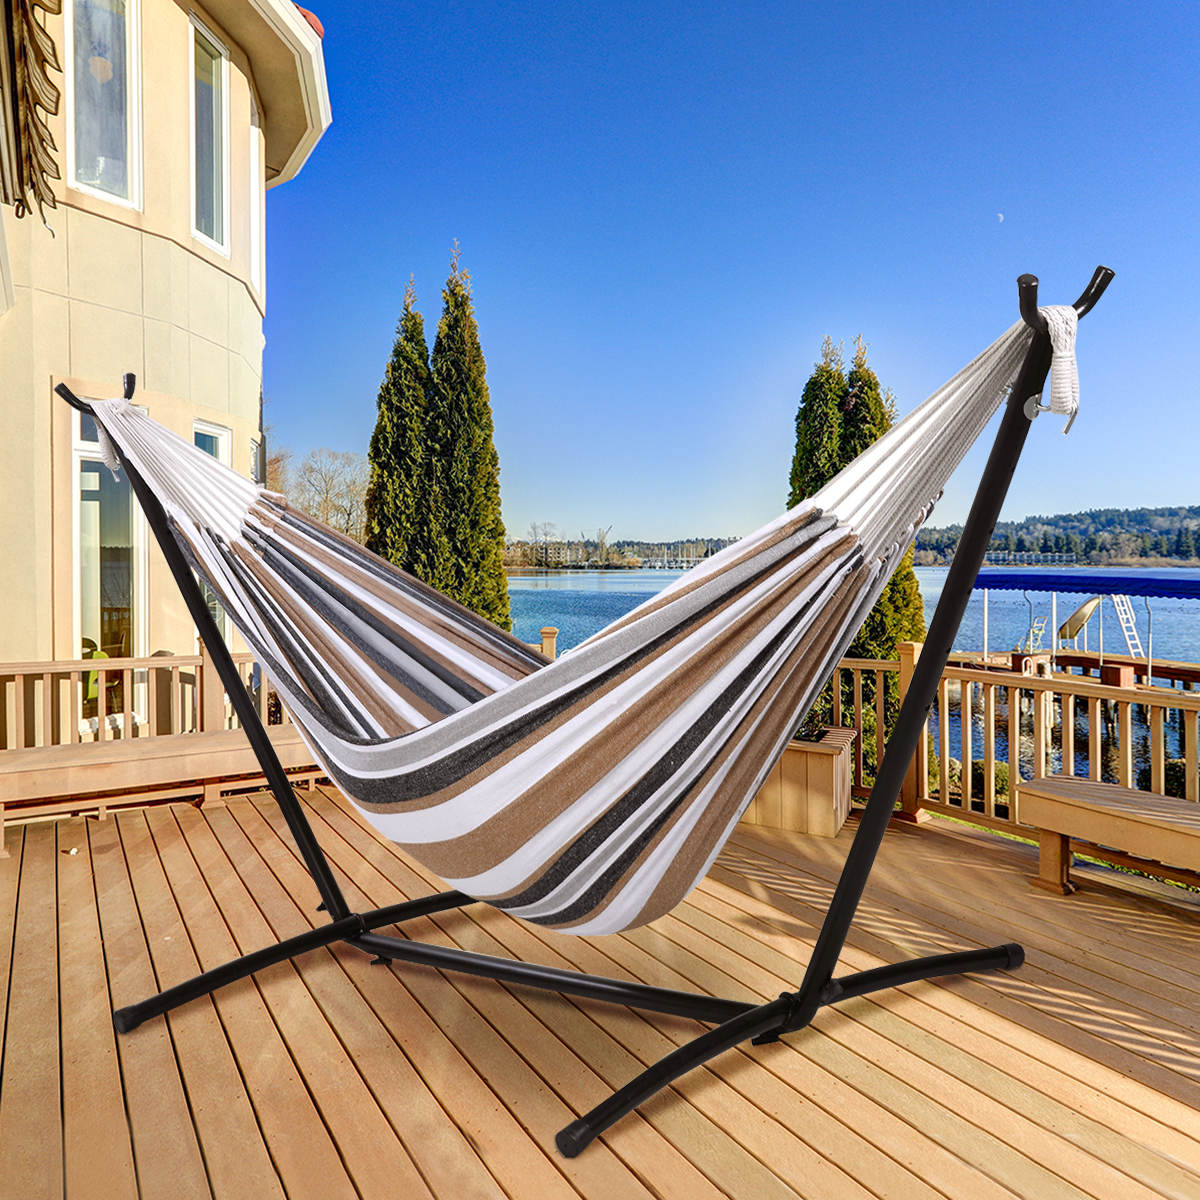 YouYeap Portable Double Hammock with Stand Included - image 3 of 6